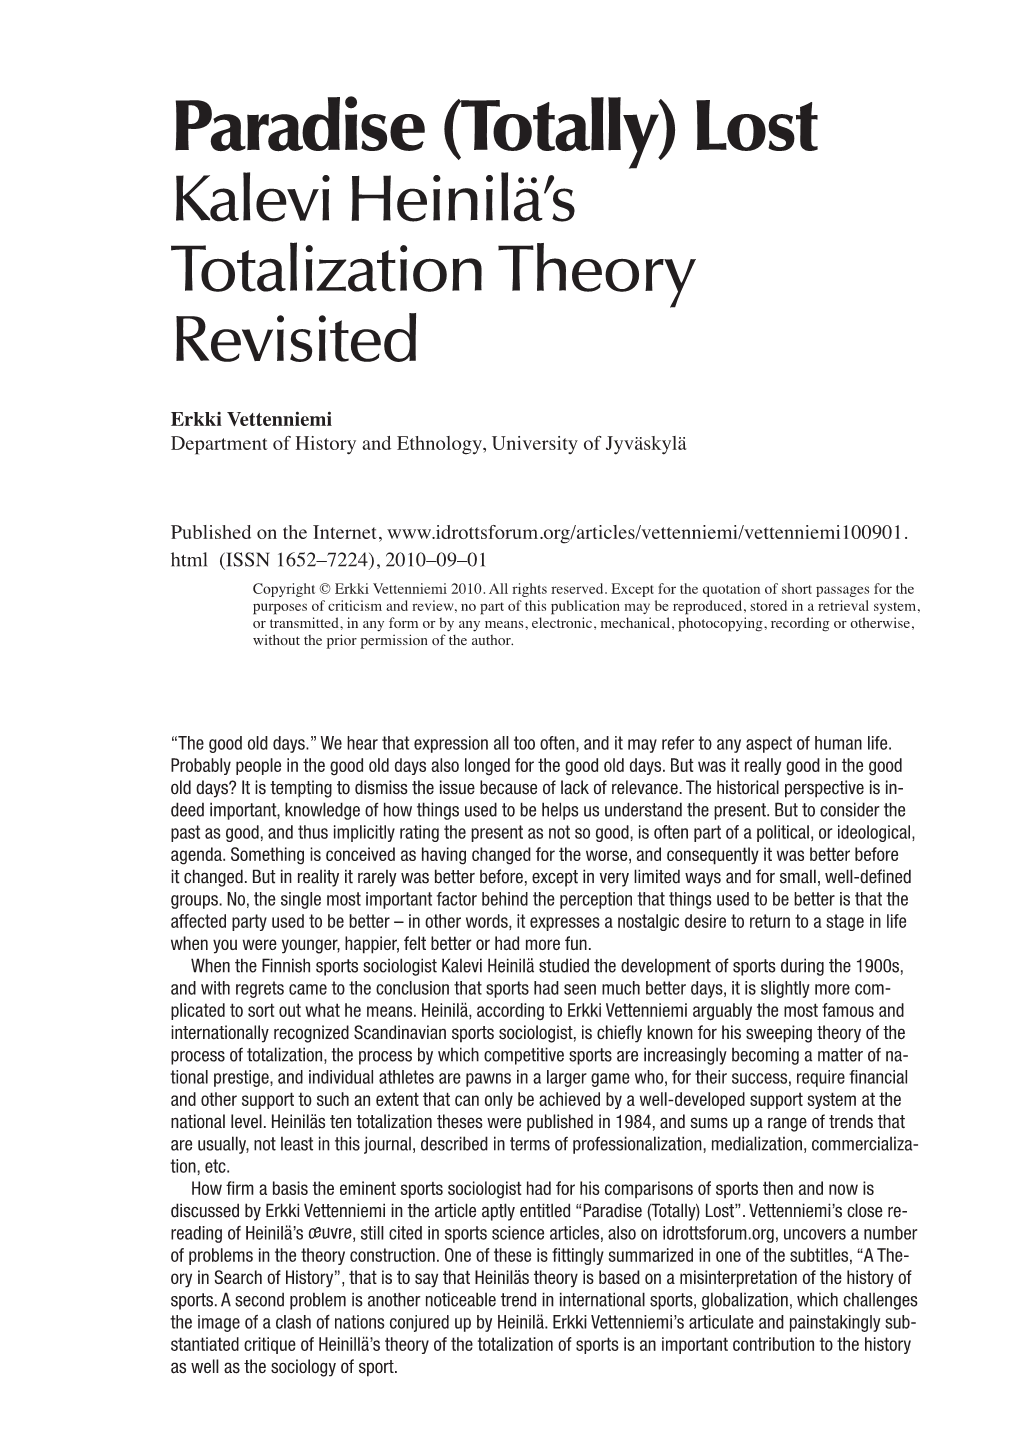 Totally) Lost Kalevi Heinilä’S Totalization Theory Revisited